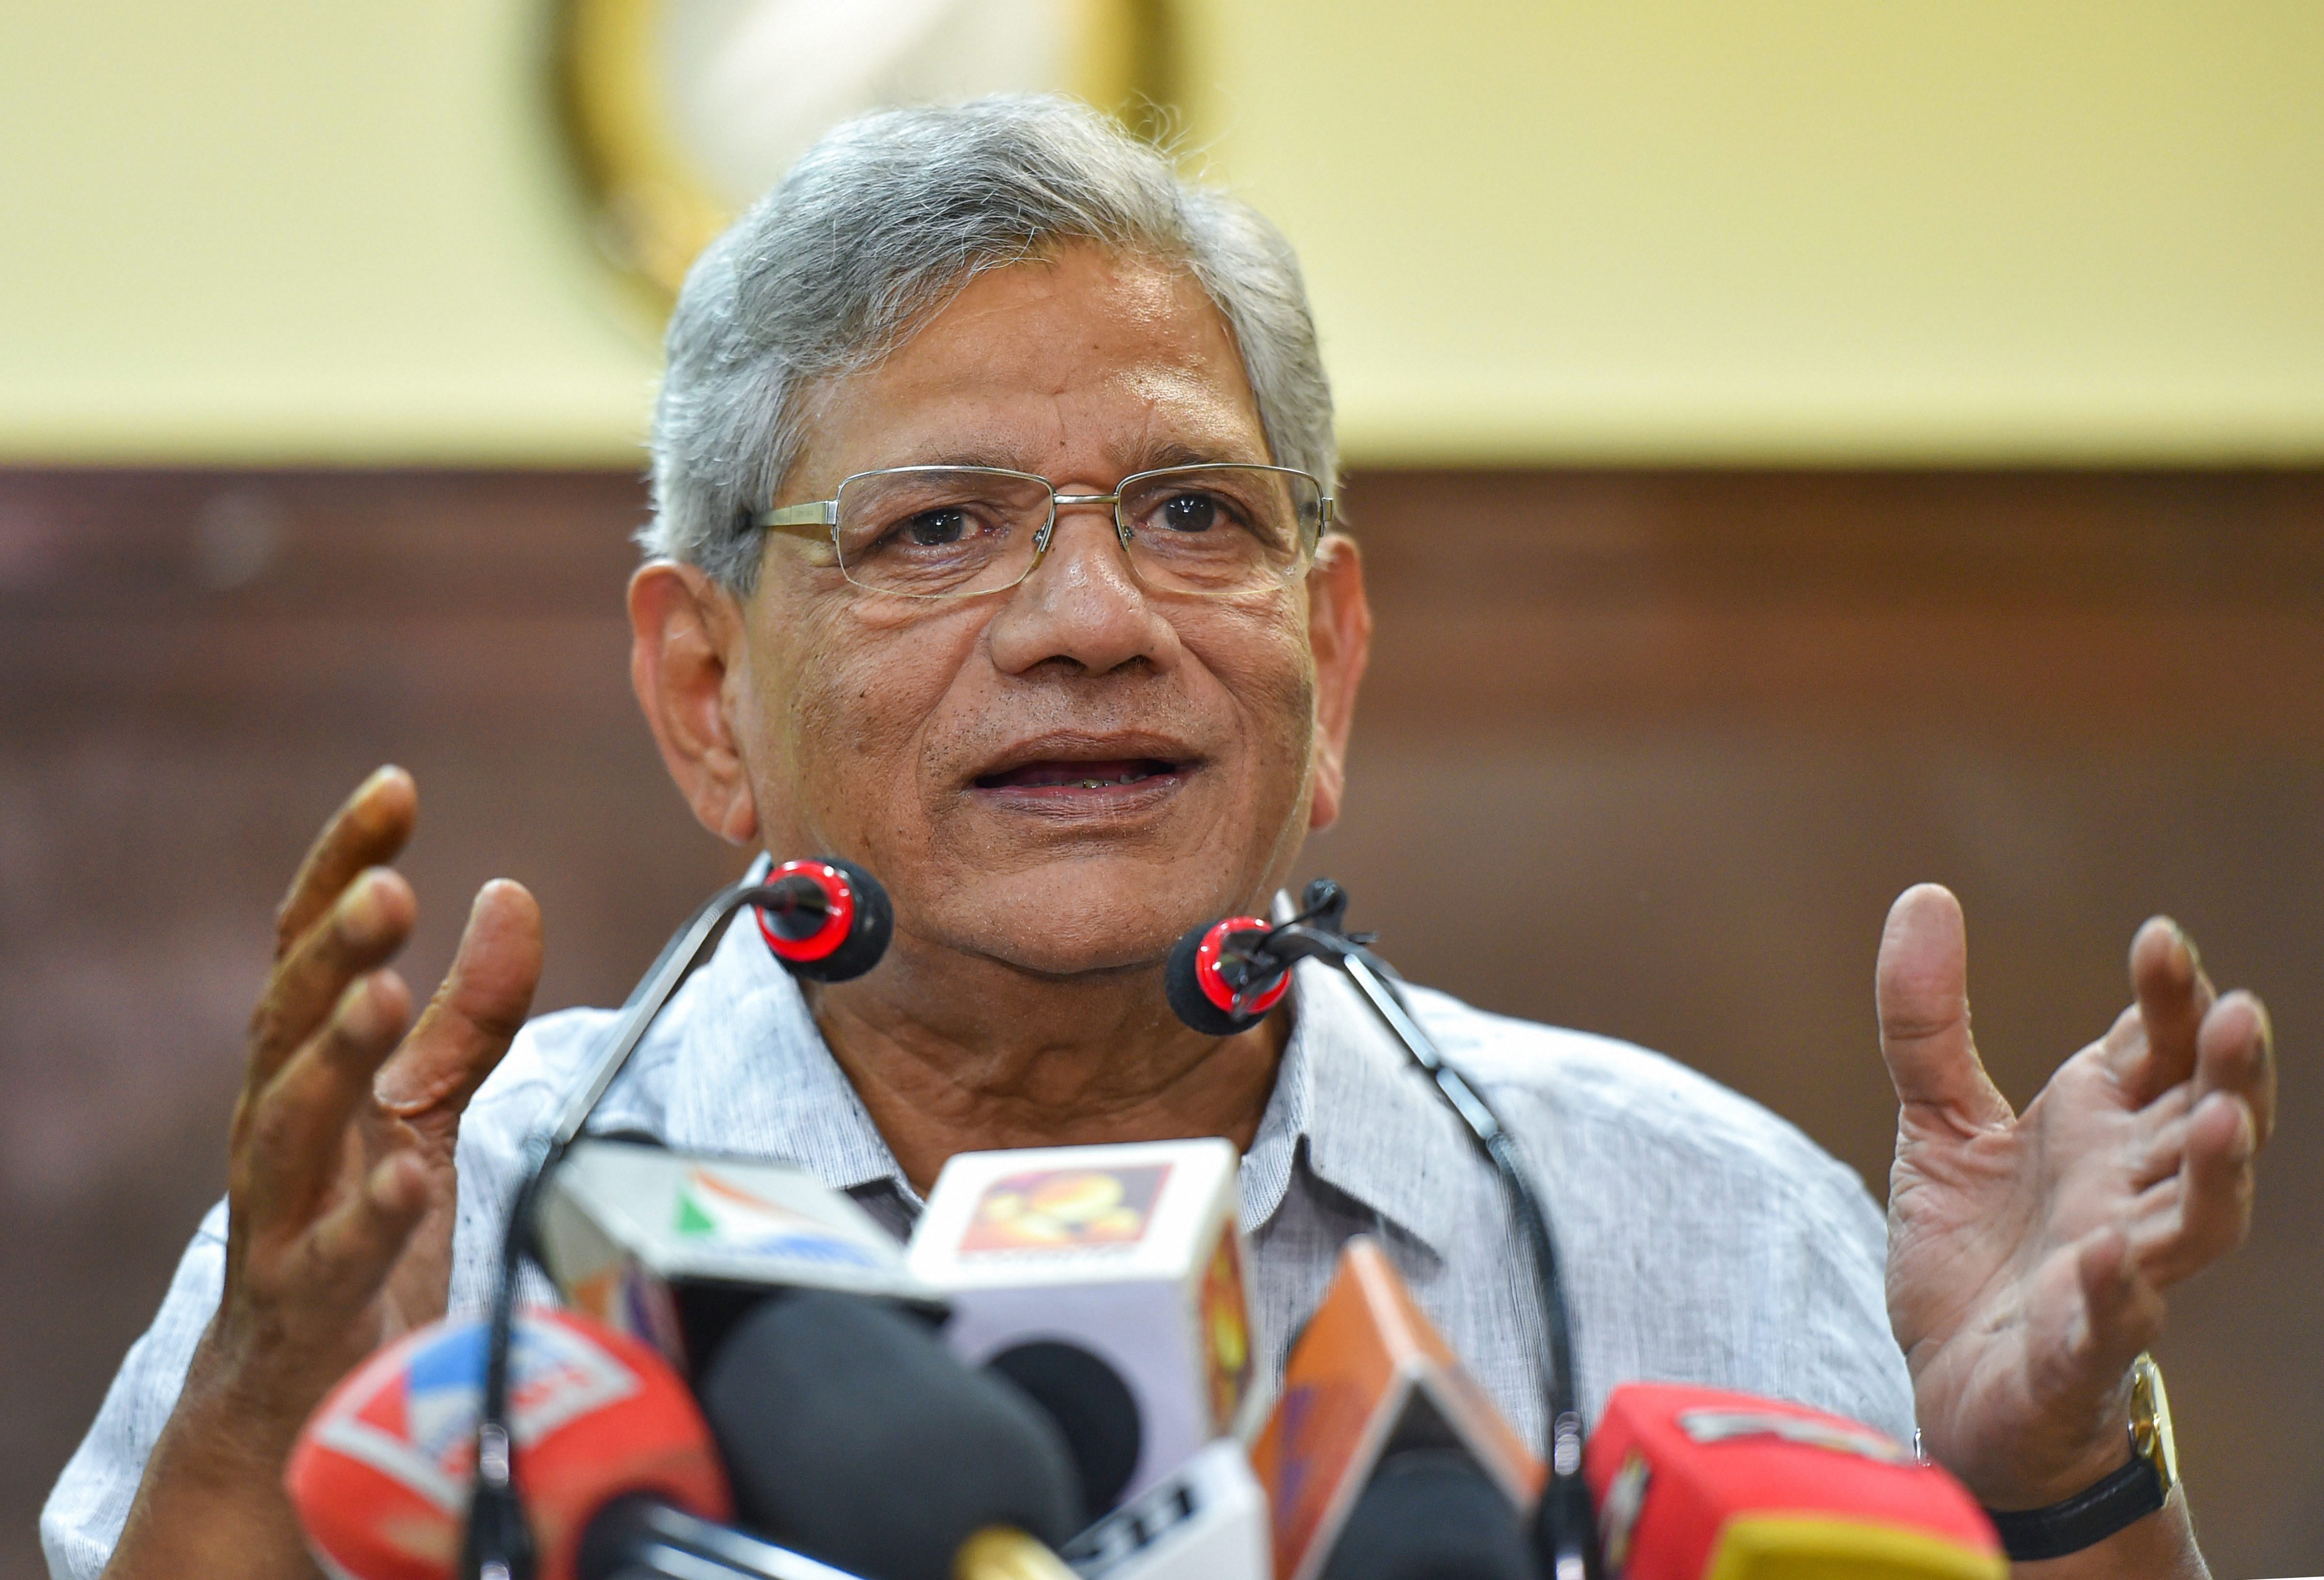 No grand alliance could have countered powerful BJP narrative, says Yechury